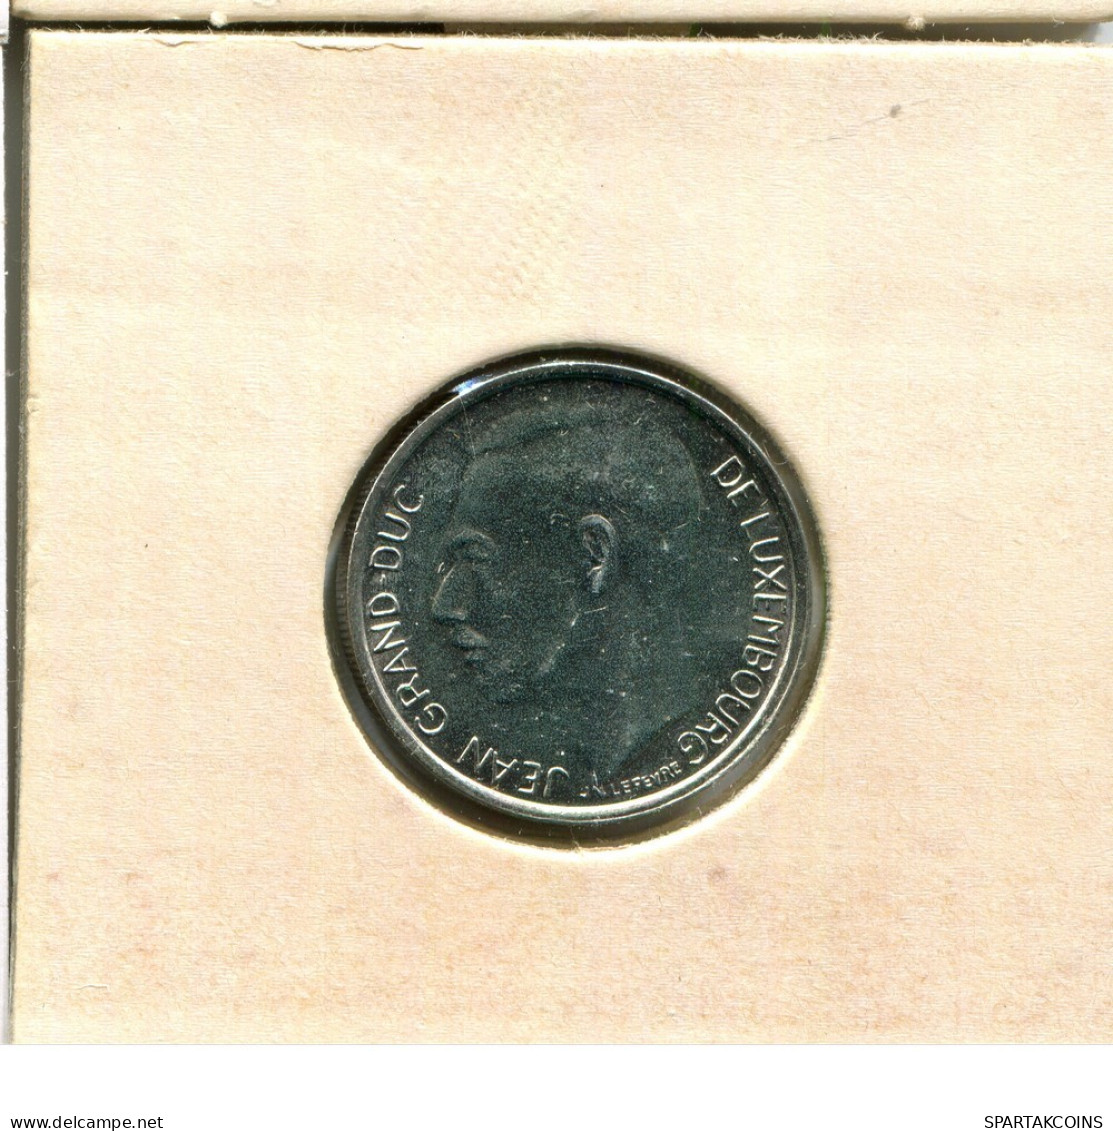 1 FRANC 1978 LUXEMBURG LUXEMBOURG Münze #AT214.D.A - Luxembourg